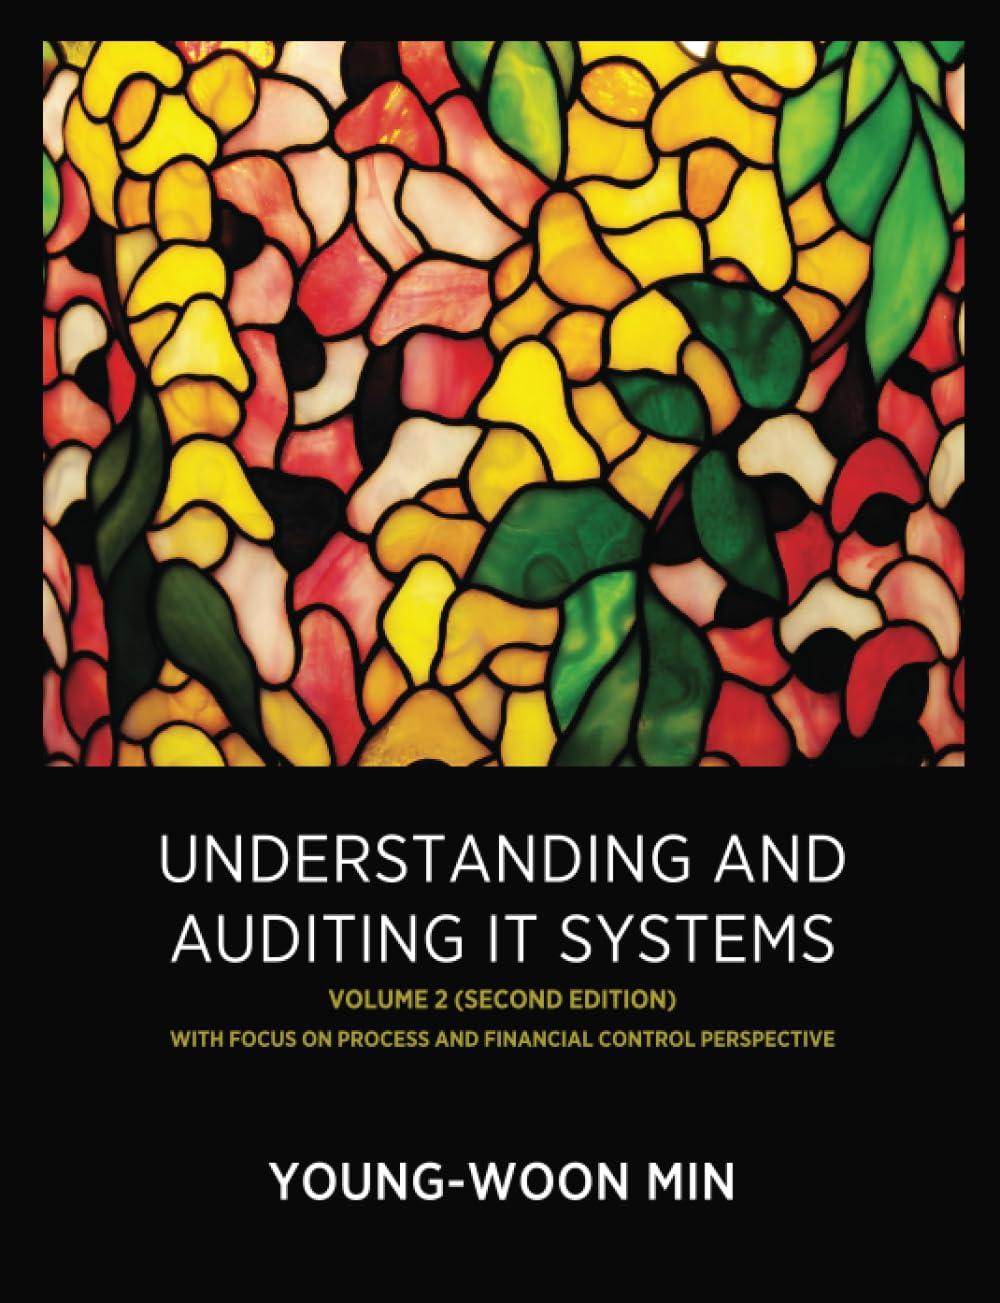 understanding and auditing it systems volume 2 2nd edition young-woon min 1257758837, 978-1257758838